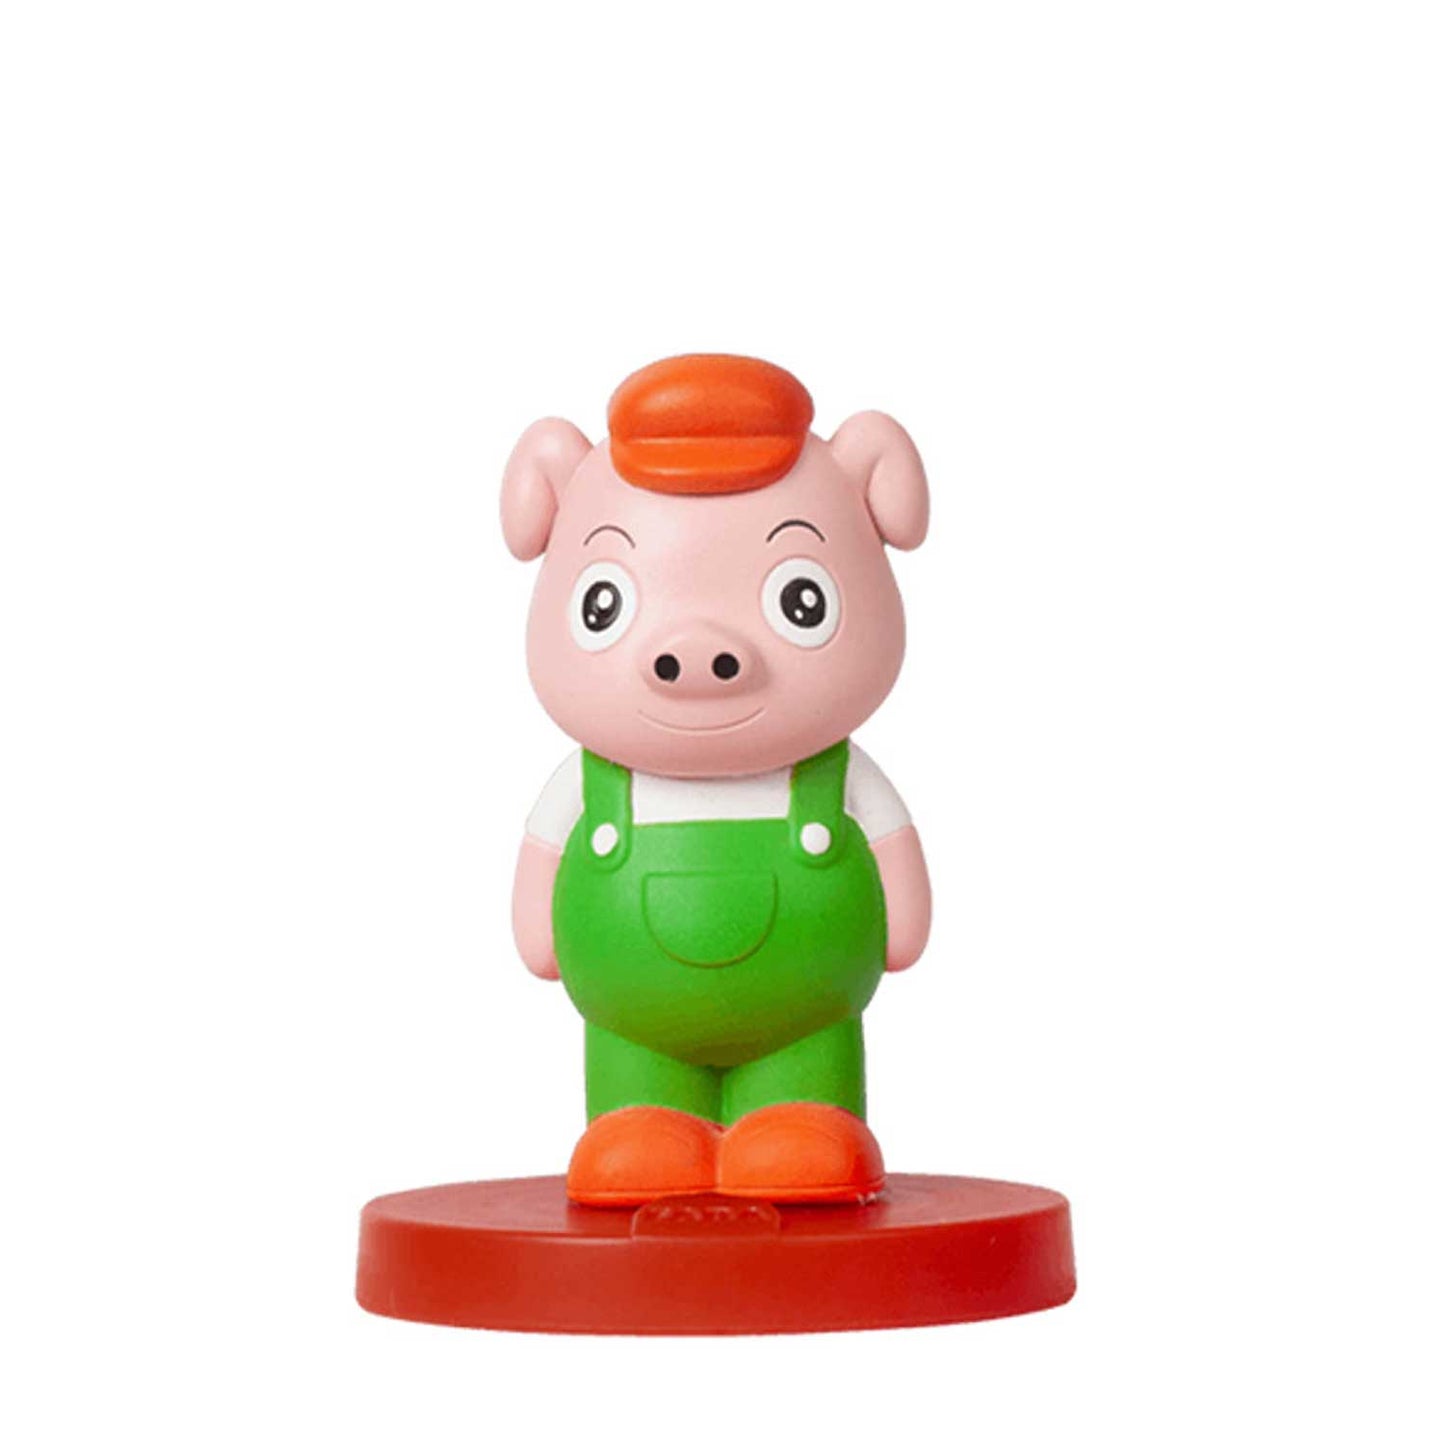 Faba - The Three Little Pigs and Other Stories